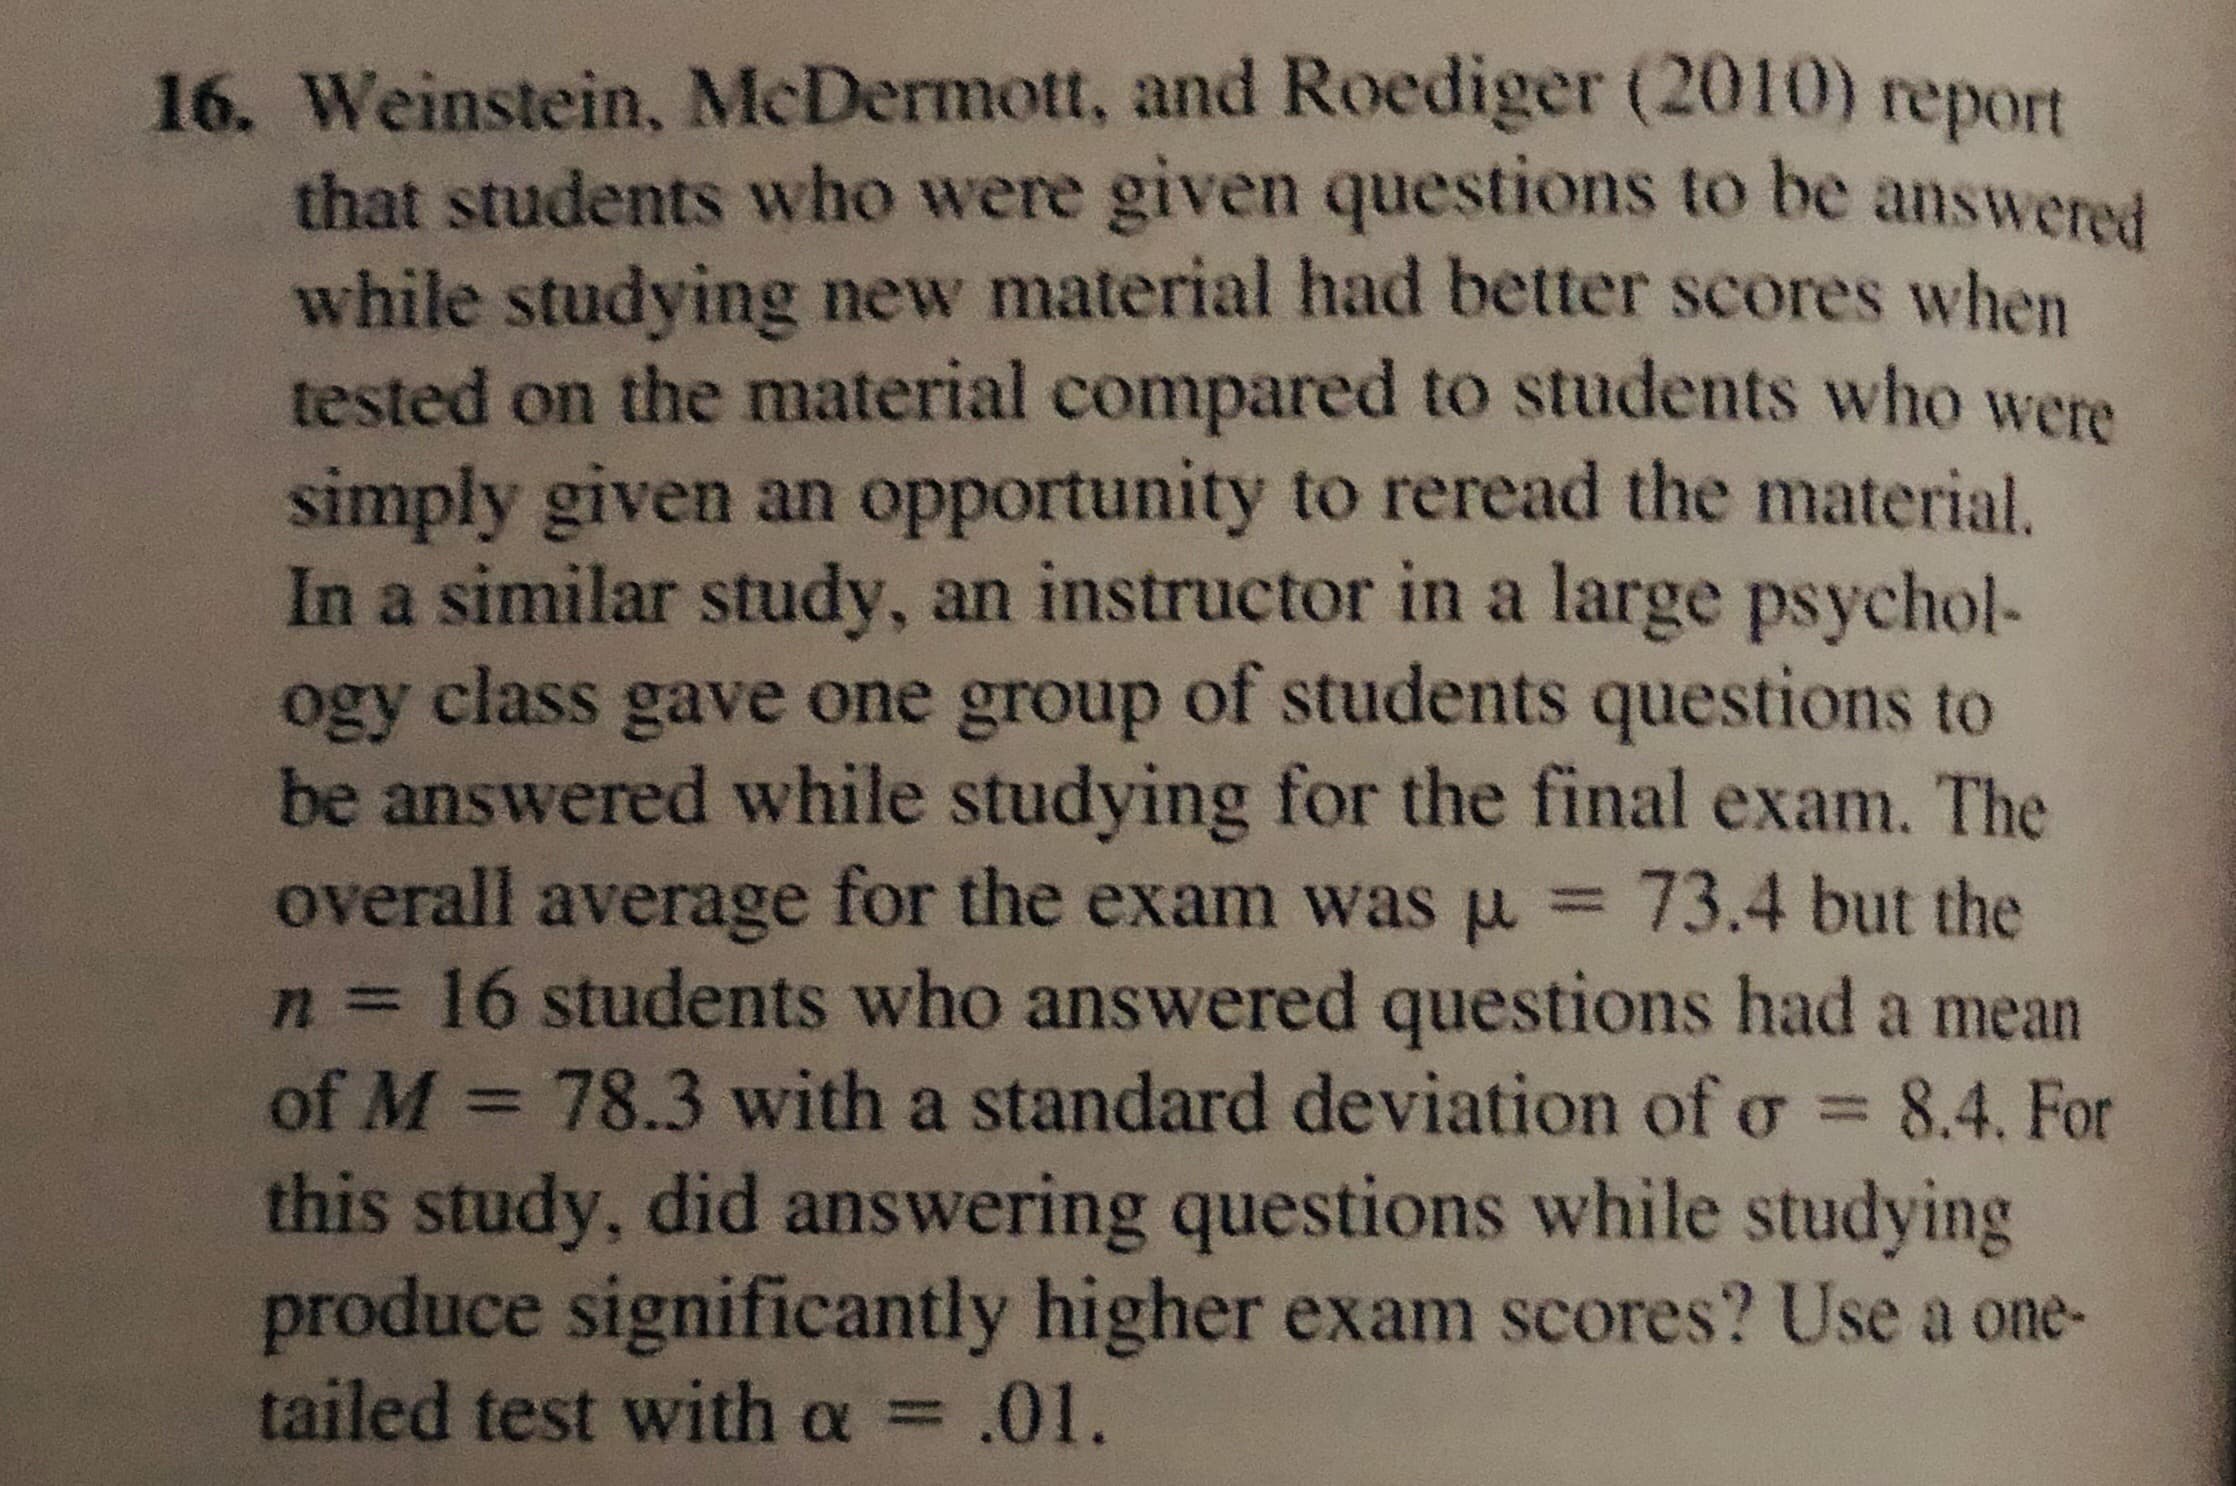 16. Weinstein, McDermott, and Roediger (2010) report
that students who were given questions to be answered
while studying new material had better scores when
tested on the material compared to students who were
simply given an opportunity to reread the material.
In a similar study, an instructor in a large psychol-
ogy class gave one group of students questions to
be answered while studying for the final exam. The
overall average for the exam was u = 73.4 but the
n3D16 students who answered questions had a mean
of M = 78.3 with a standard deviation ofo = 8.4. For
this study, did answering questions while studying
produce significantly higher exam scores? Use a one-
tailed test with a = .01.
